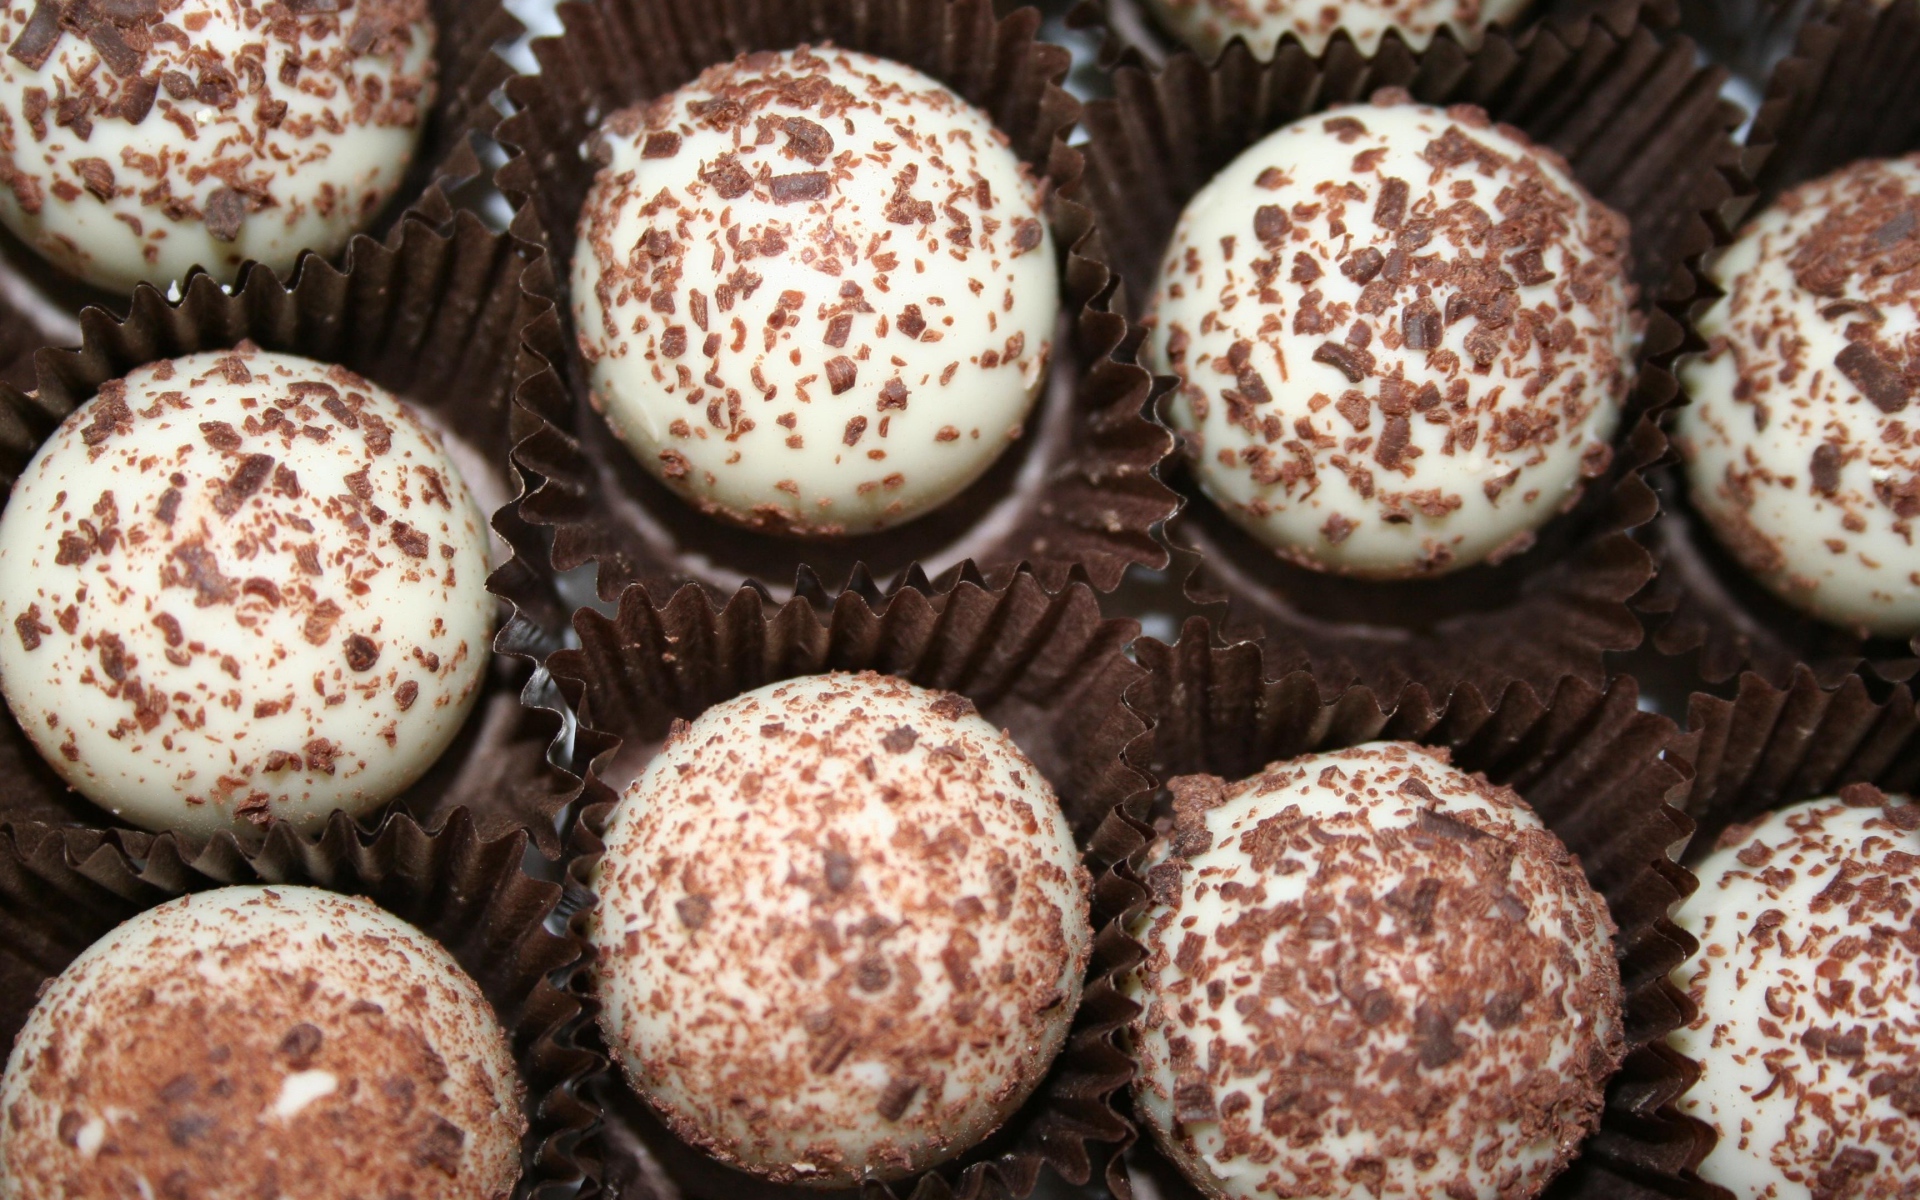 White candies with chocolate sprinkles